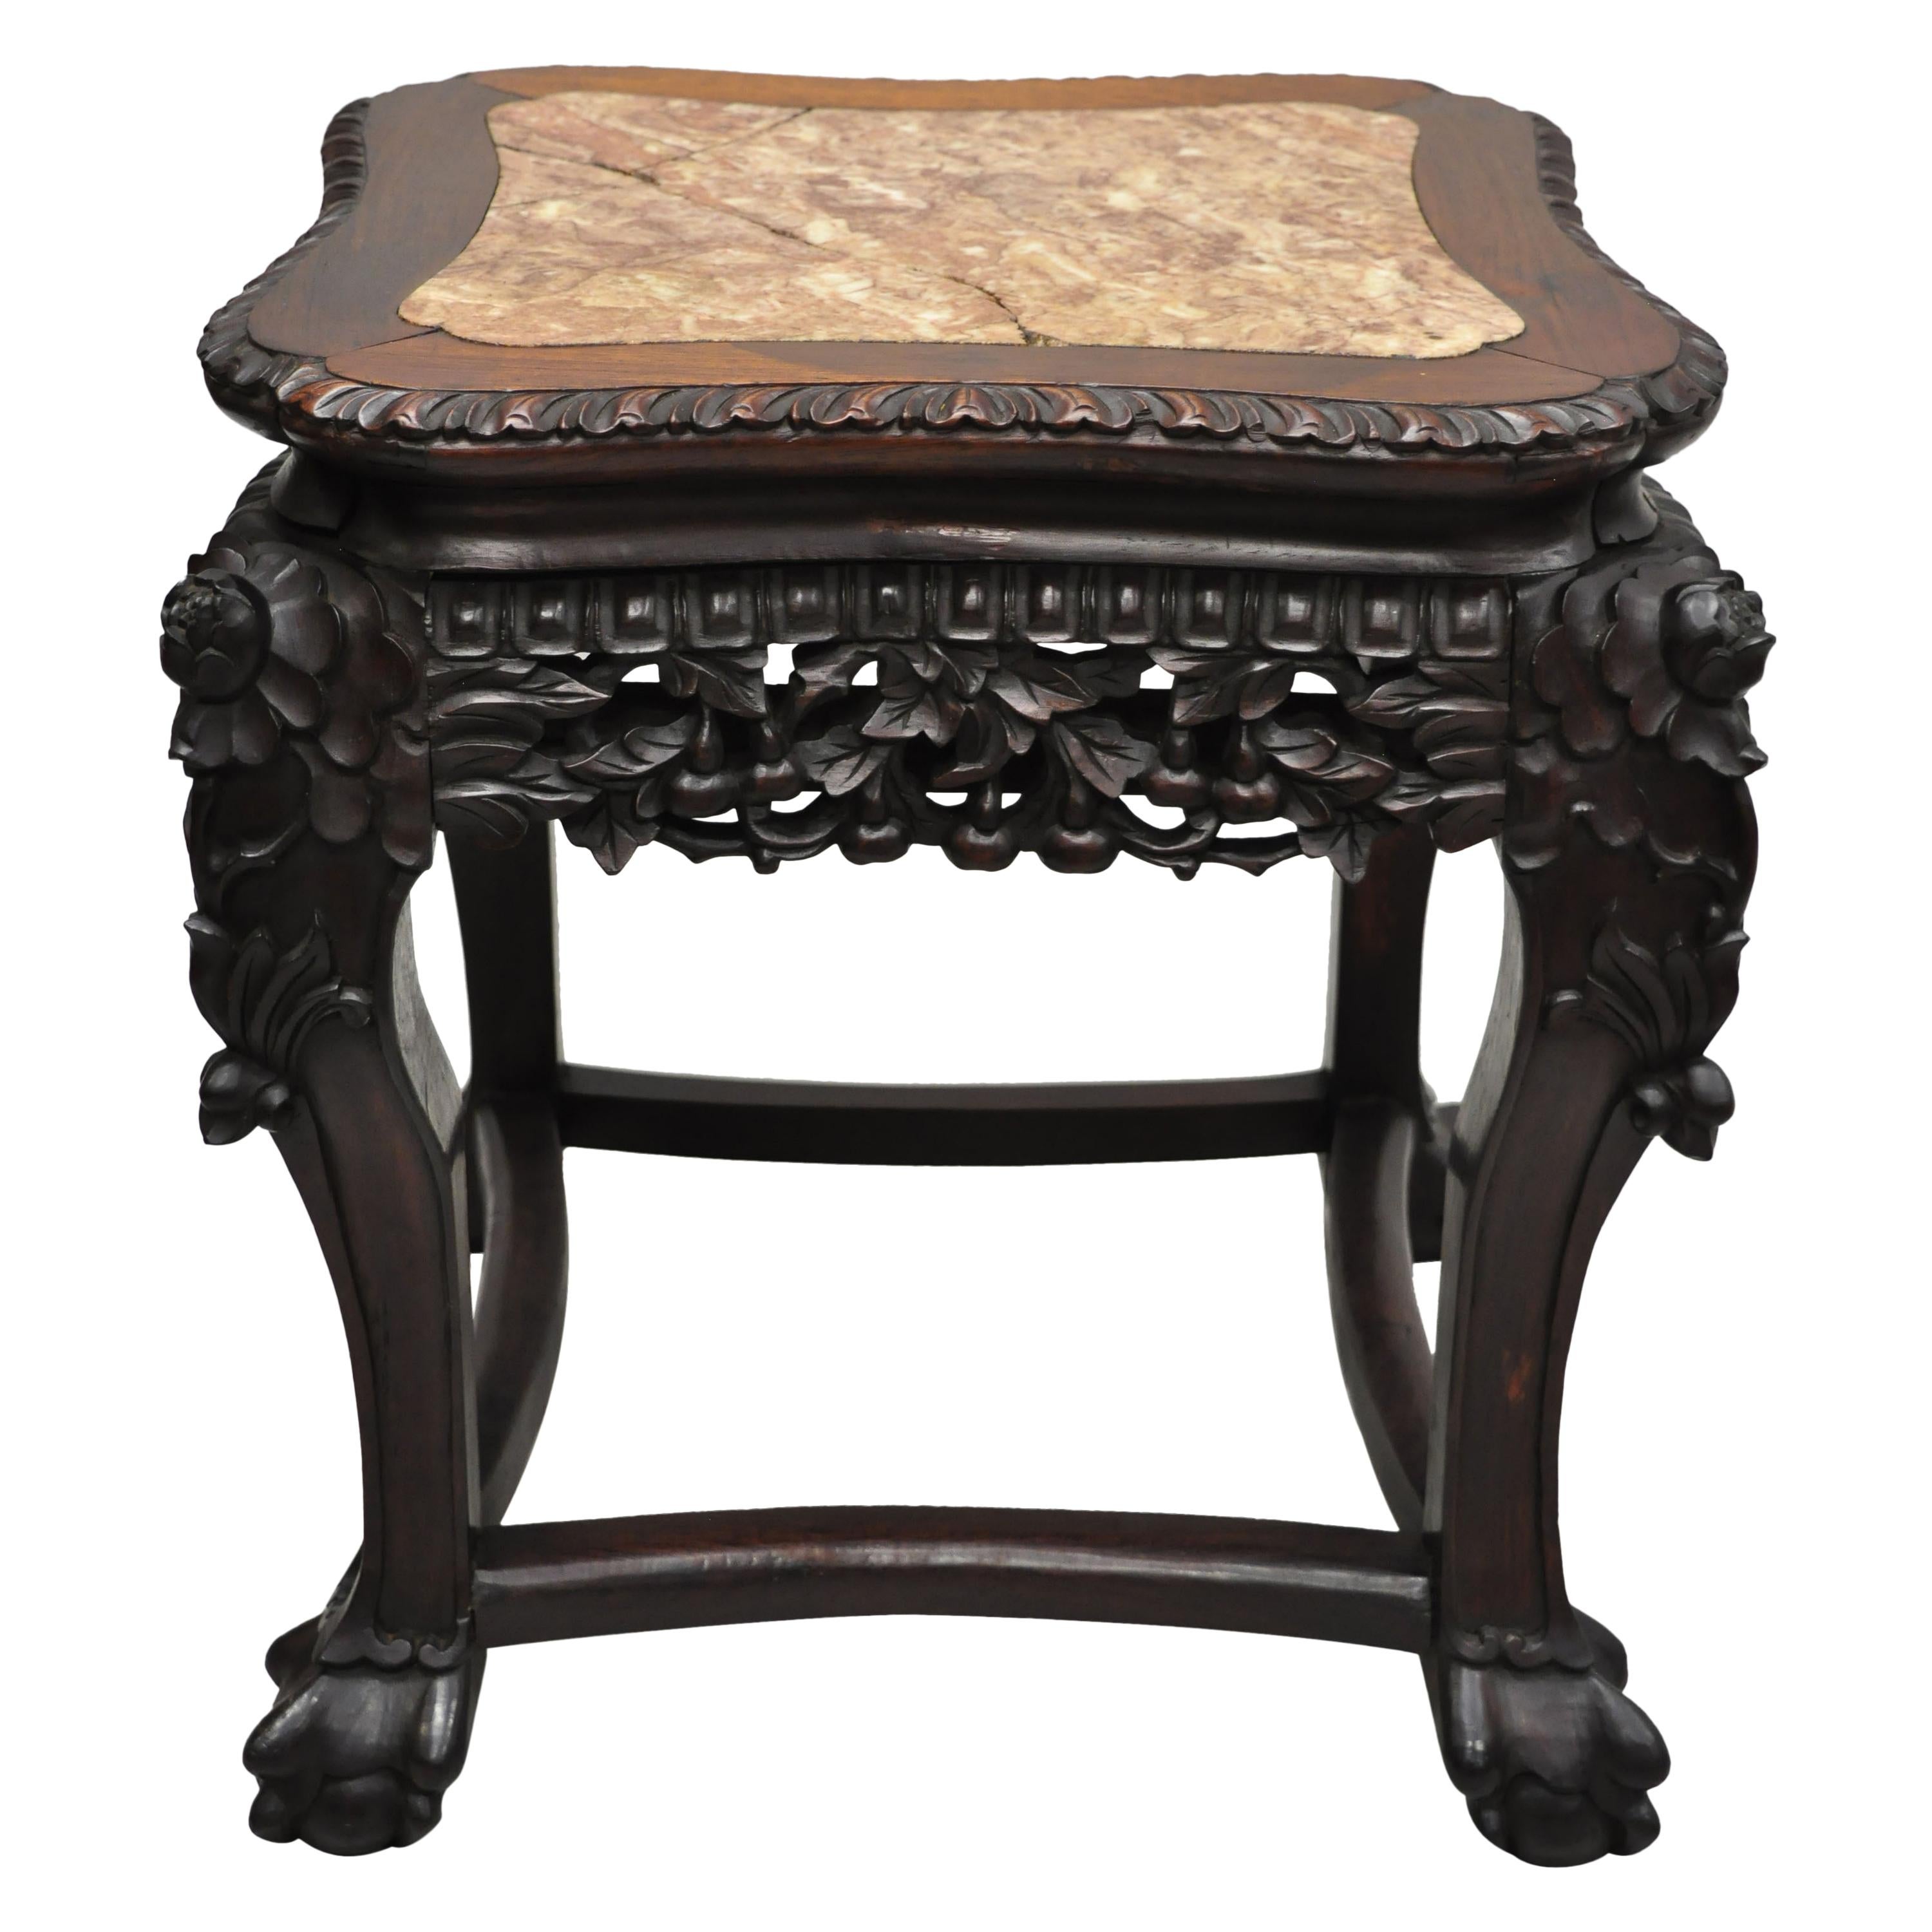 Antique Carved Hardwood Rosewood Marble-Top Chinese Pedestal Table Plant Stand H